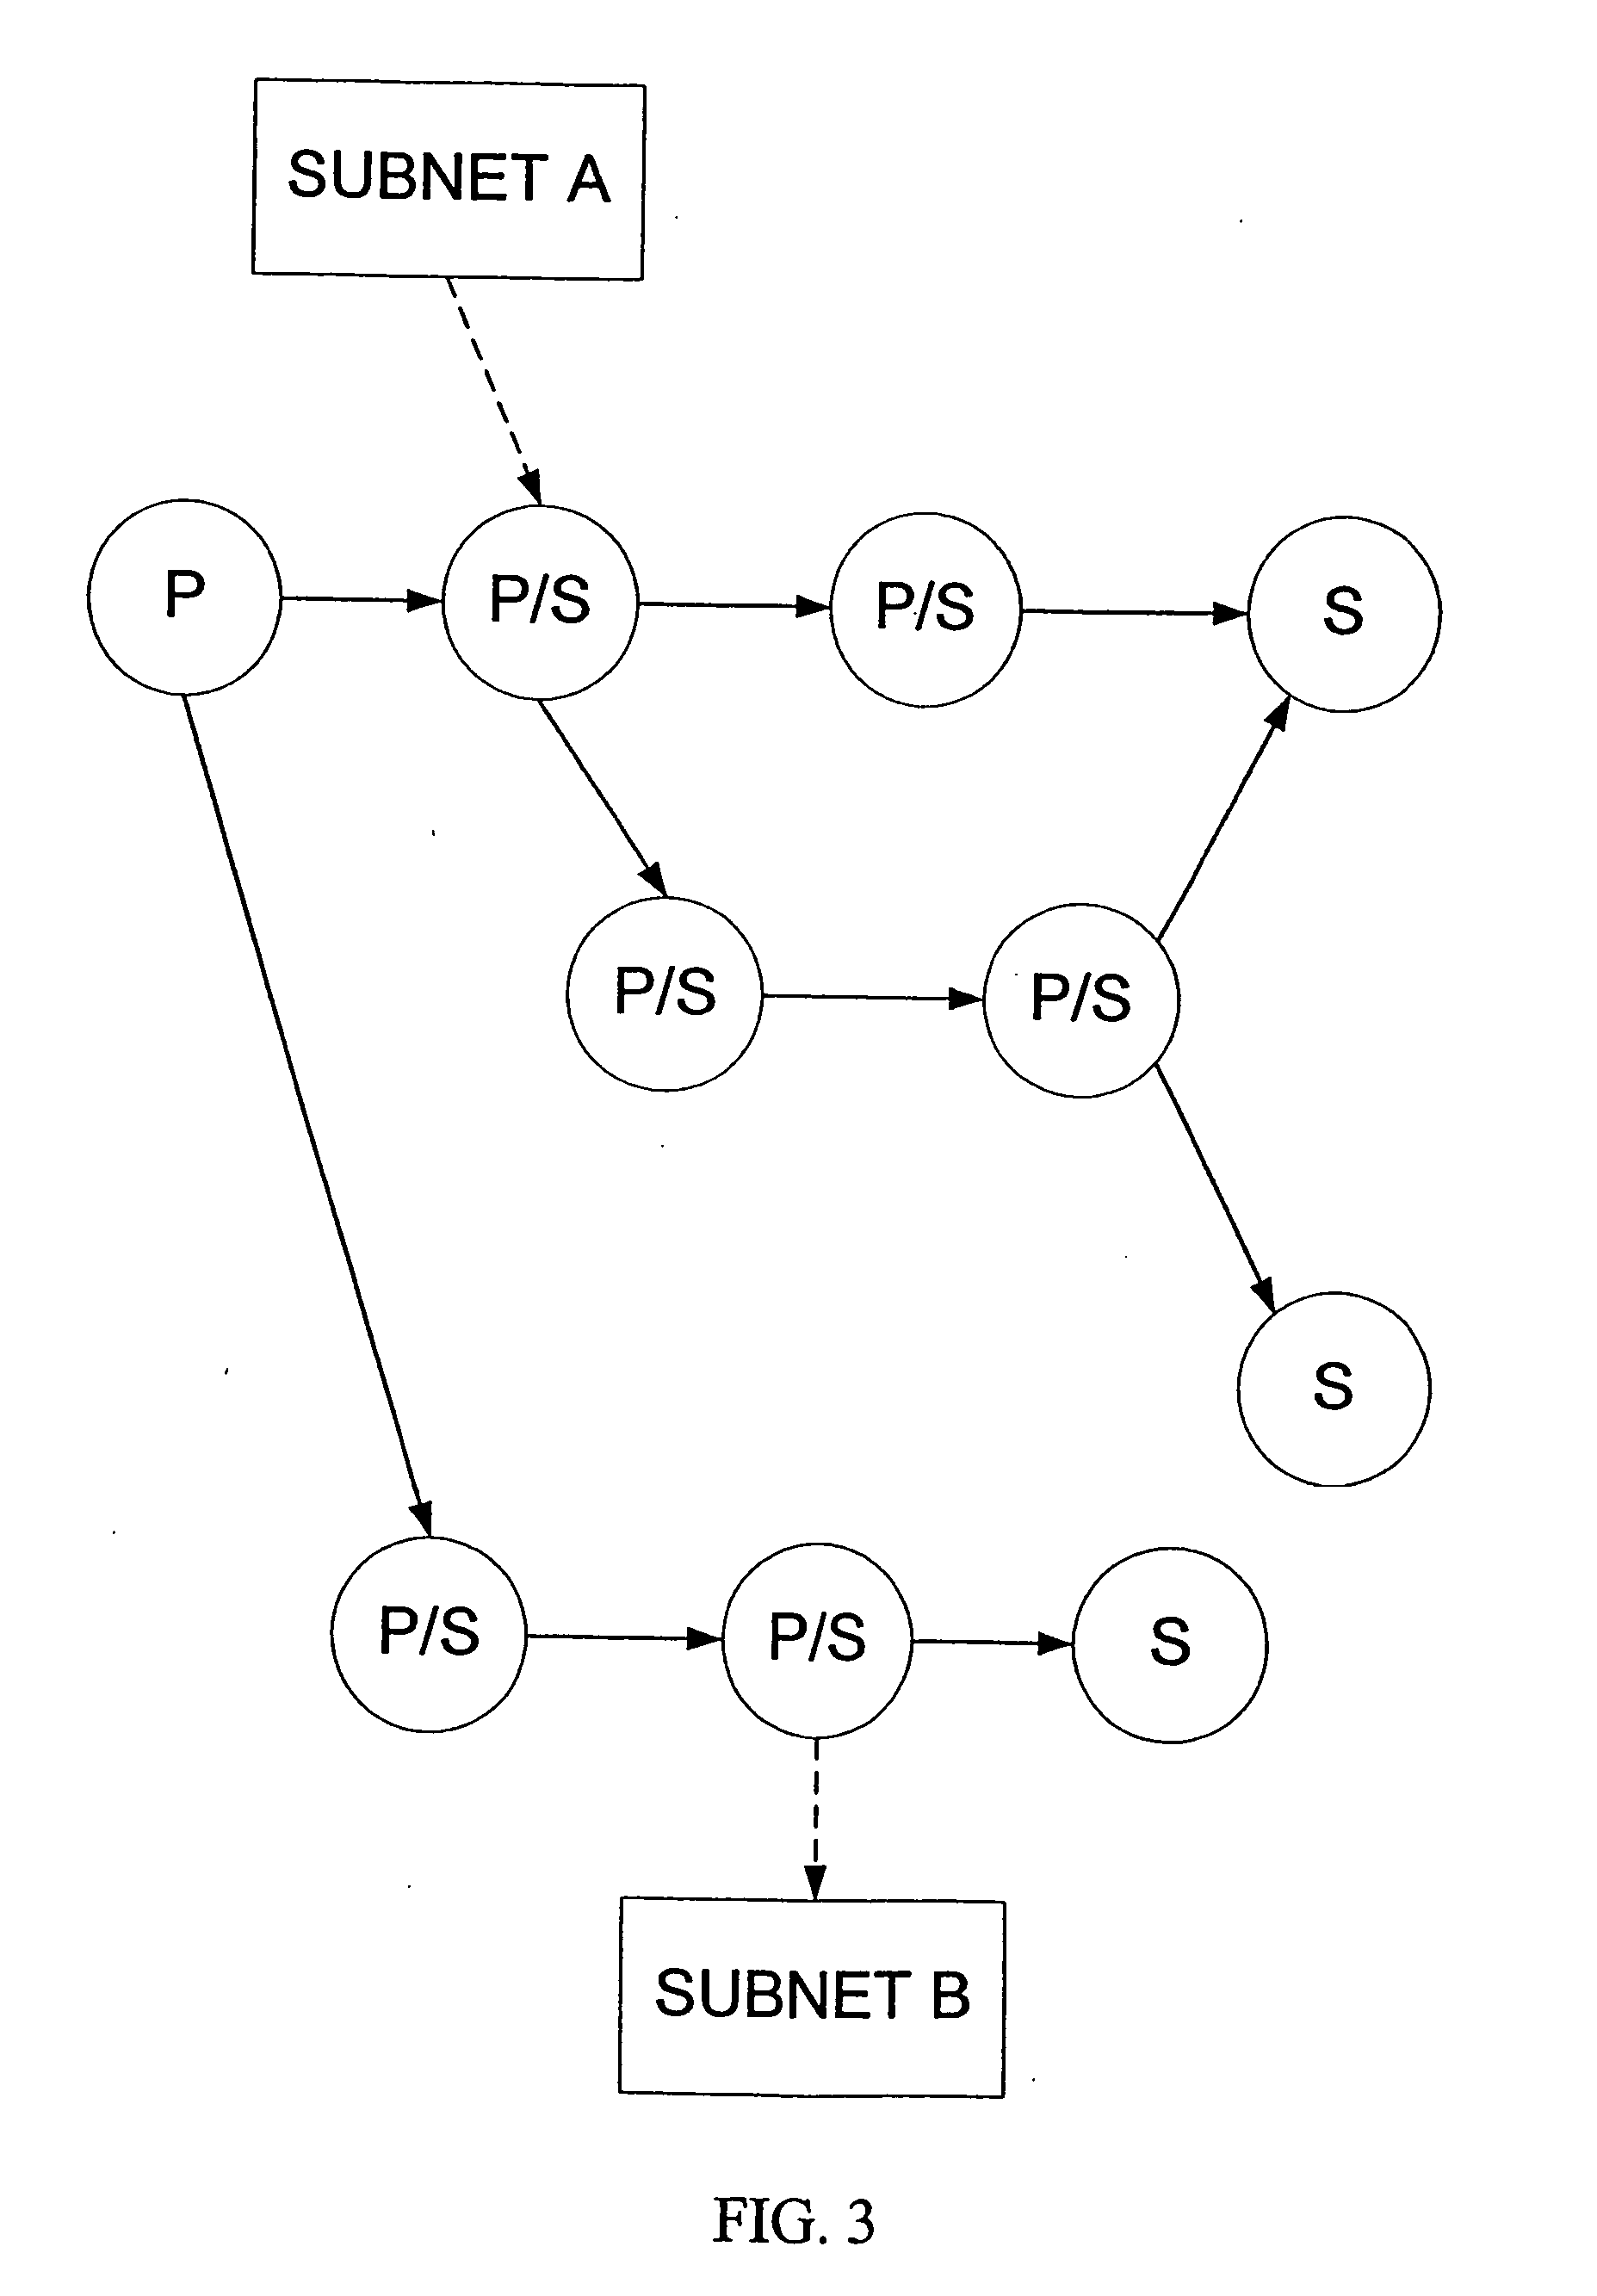 Hierarchical connected graph model for implementation of event management design